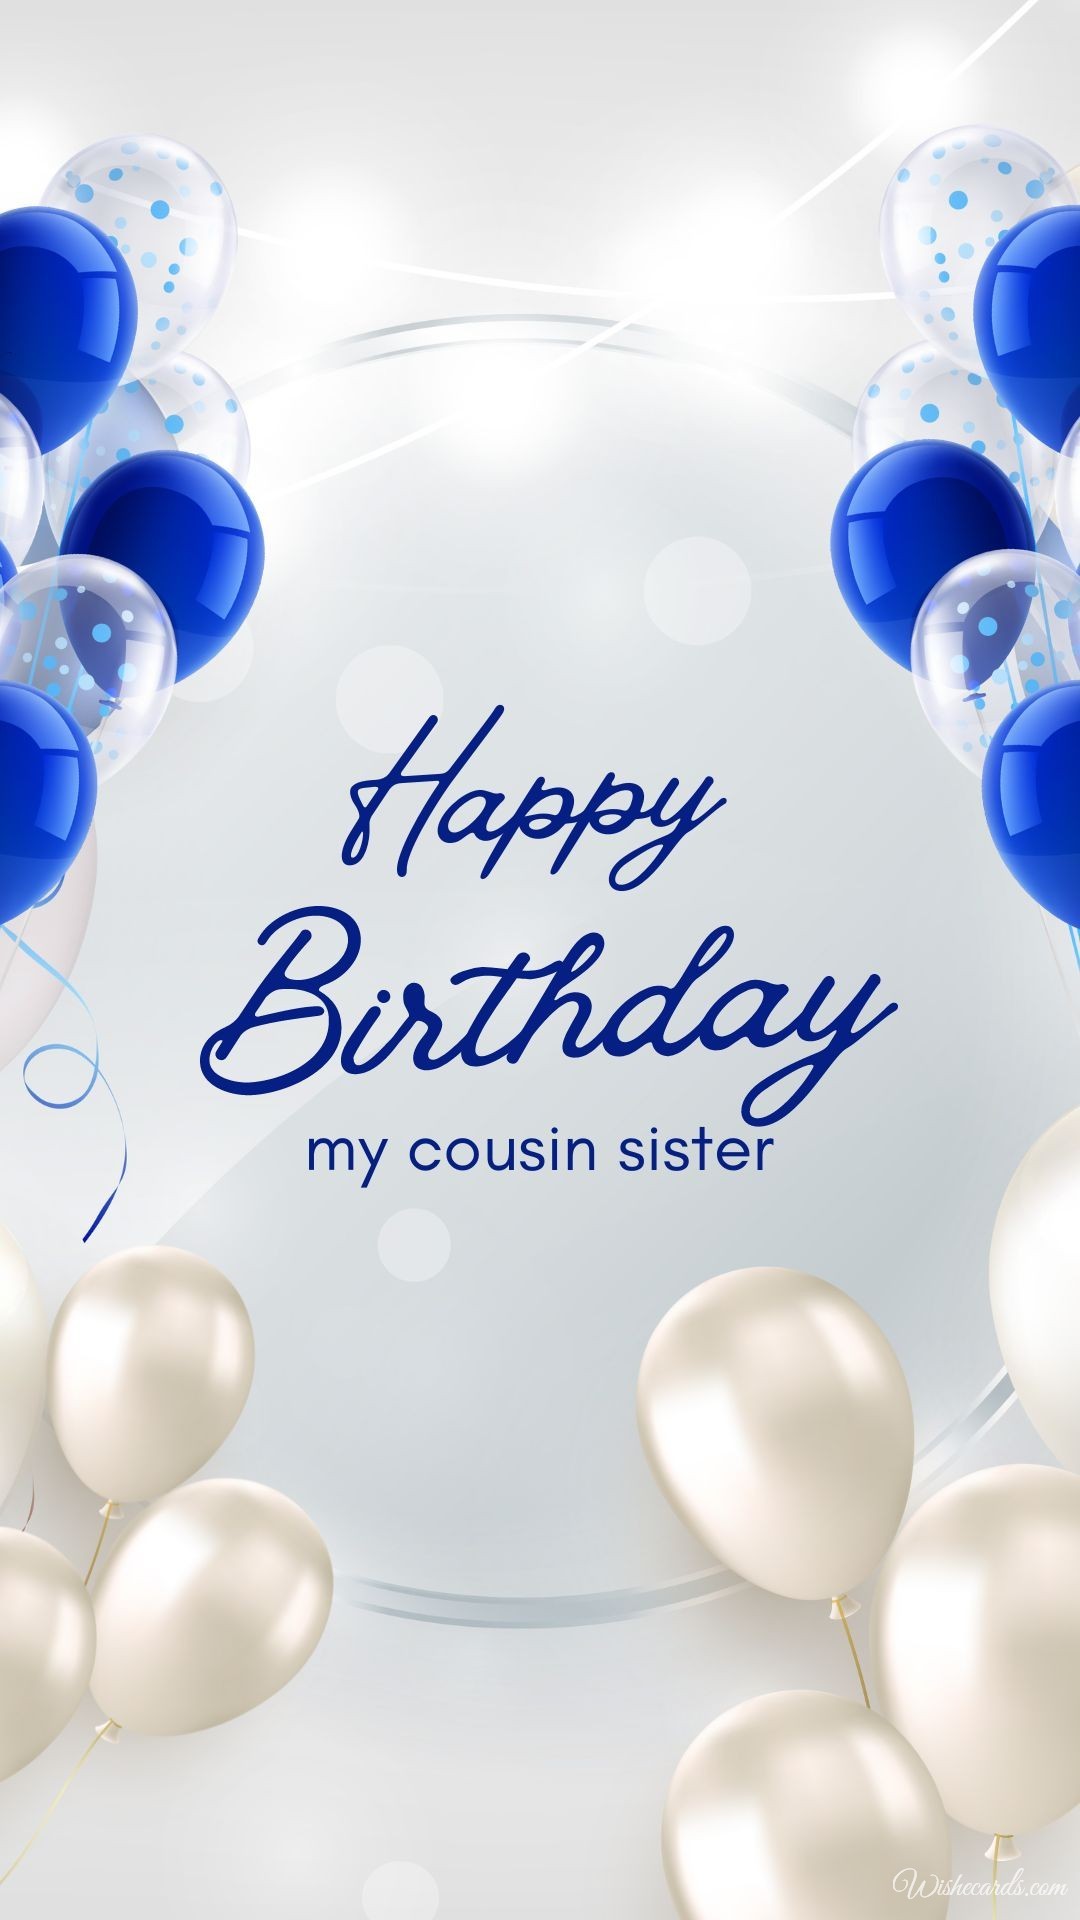 Birthday Wish for Cousin Sister Image